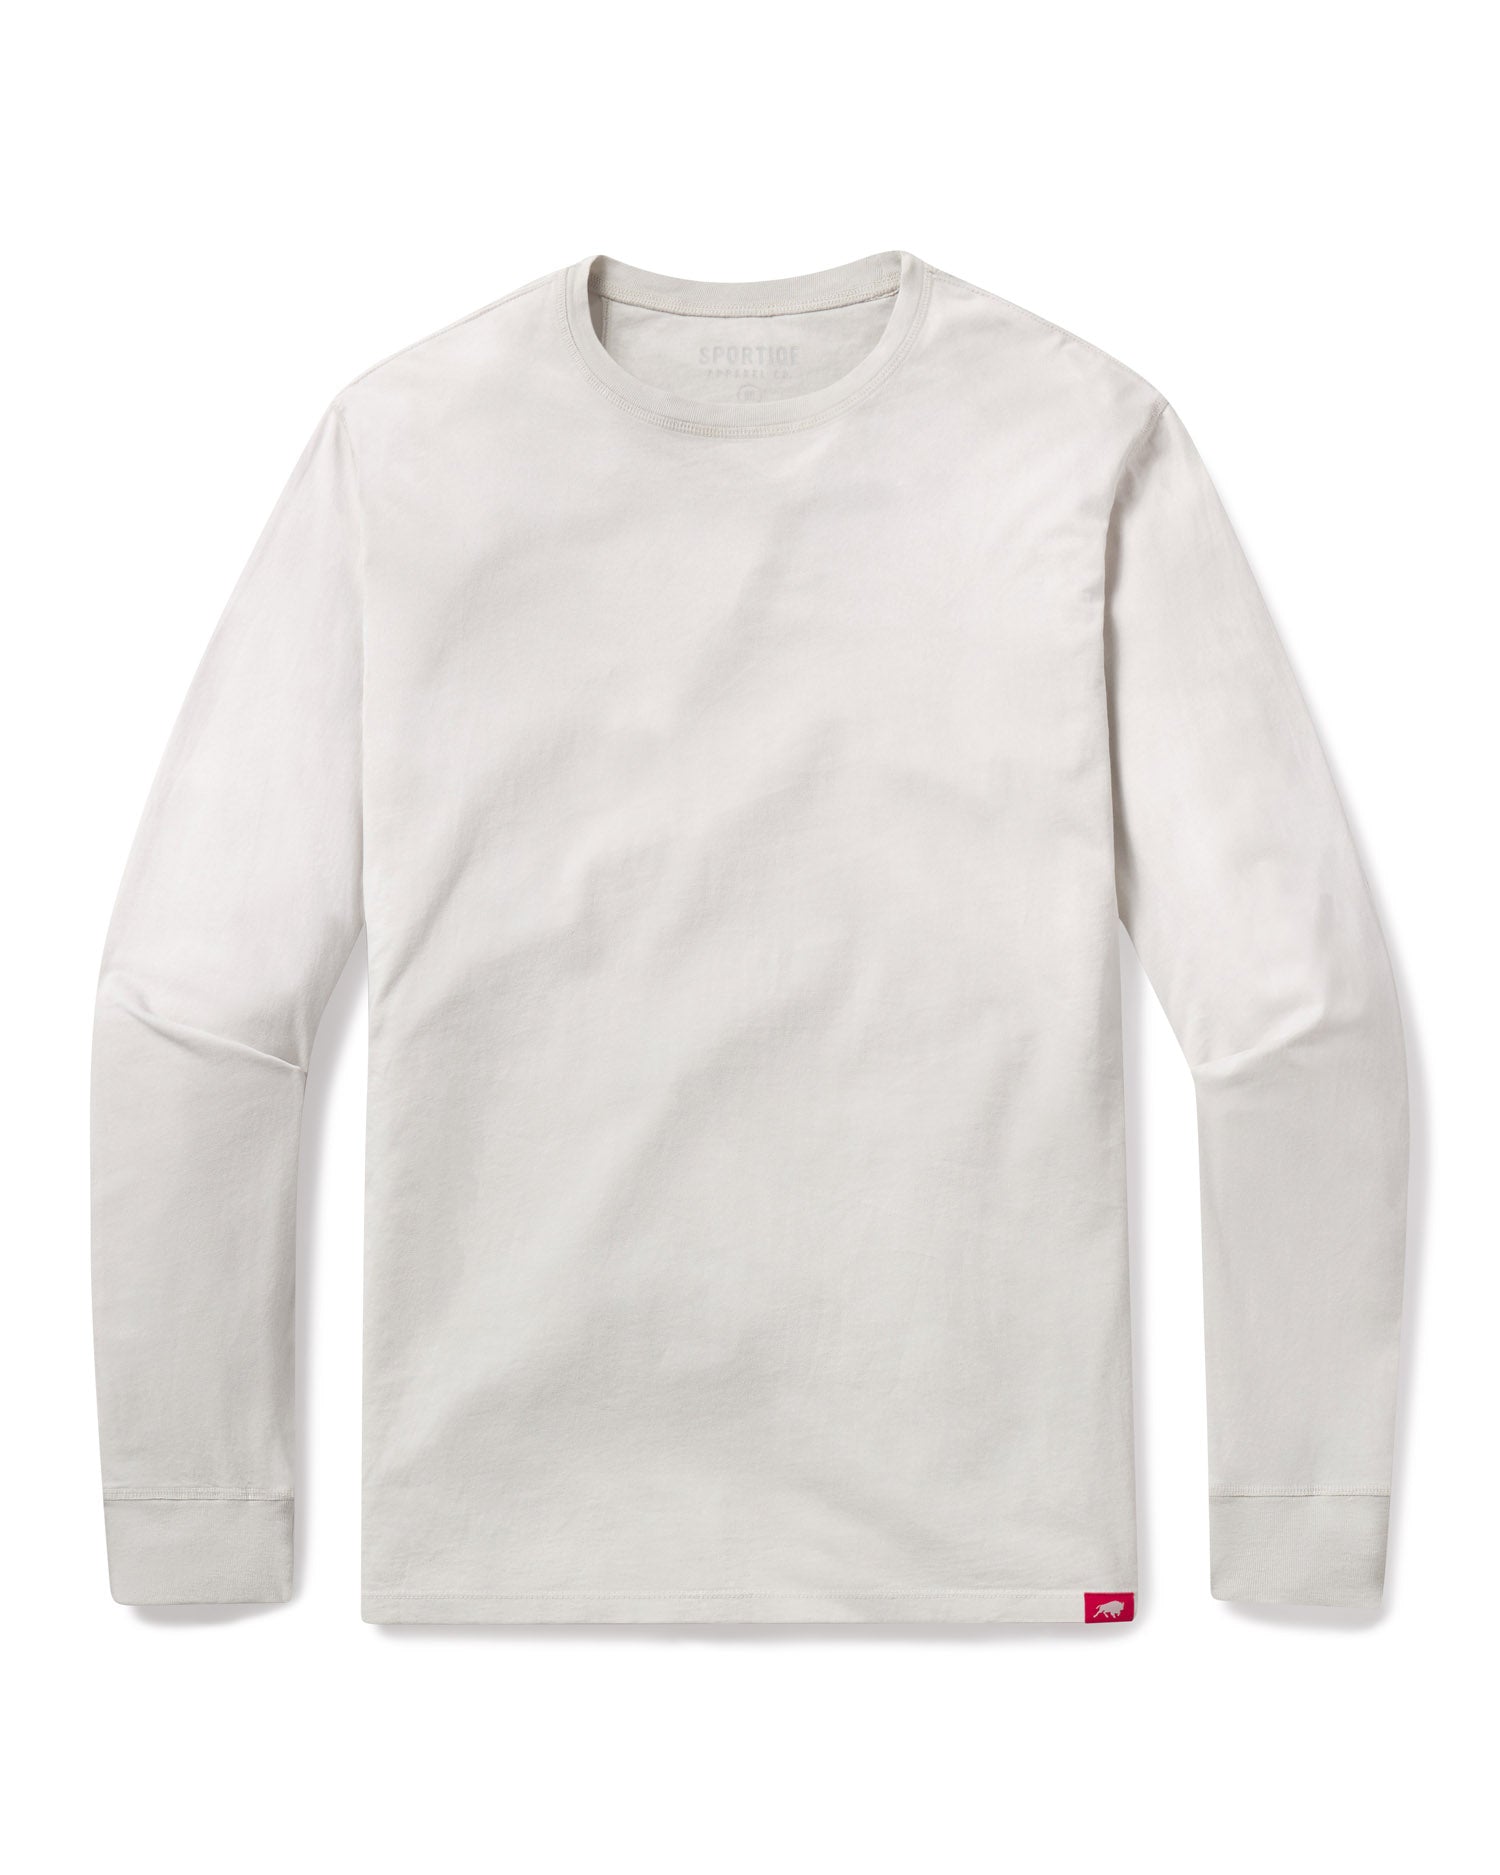 MEN'S SUN-DIPPED MOHAVE LONG SLEEVE TEE - Sportiqe Apparel 